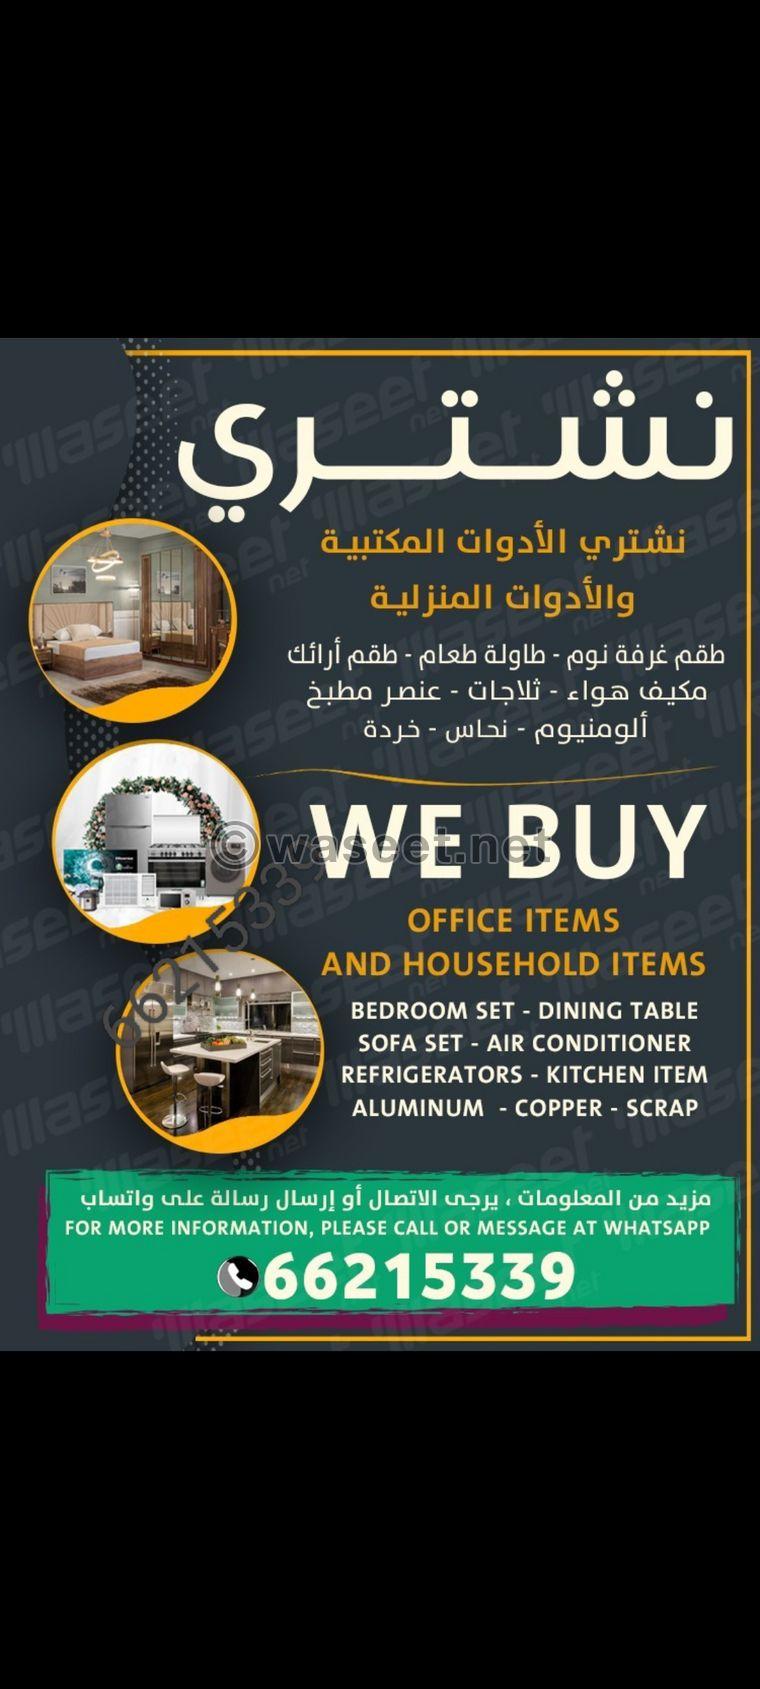 We buy office and household items 0